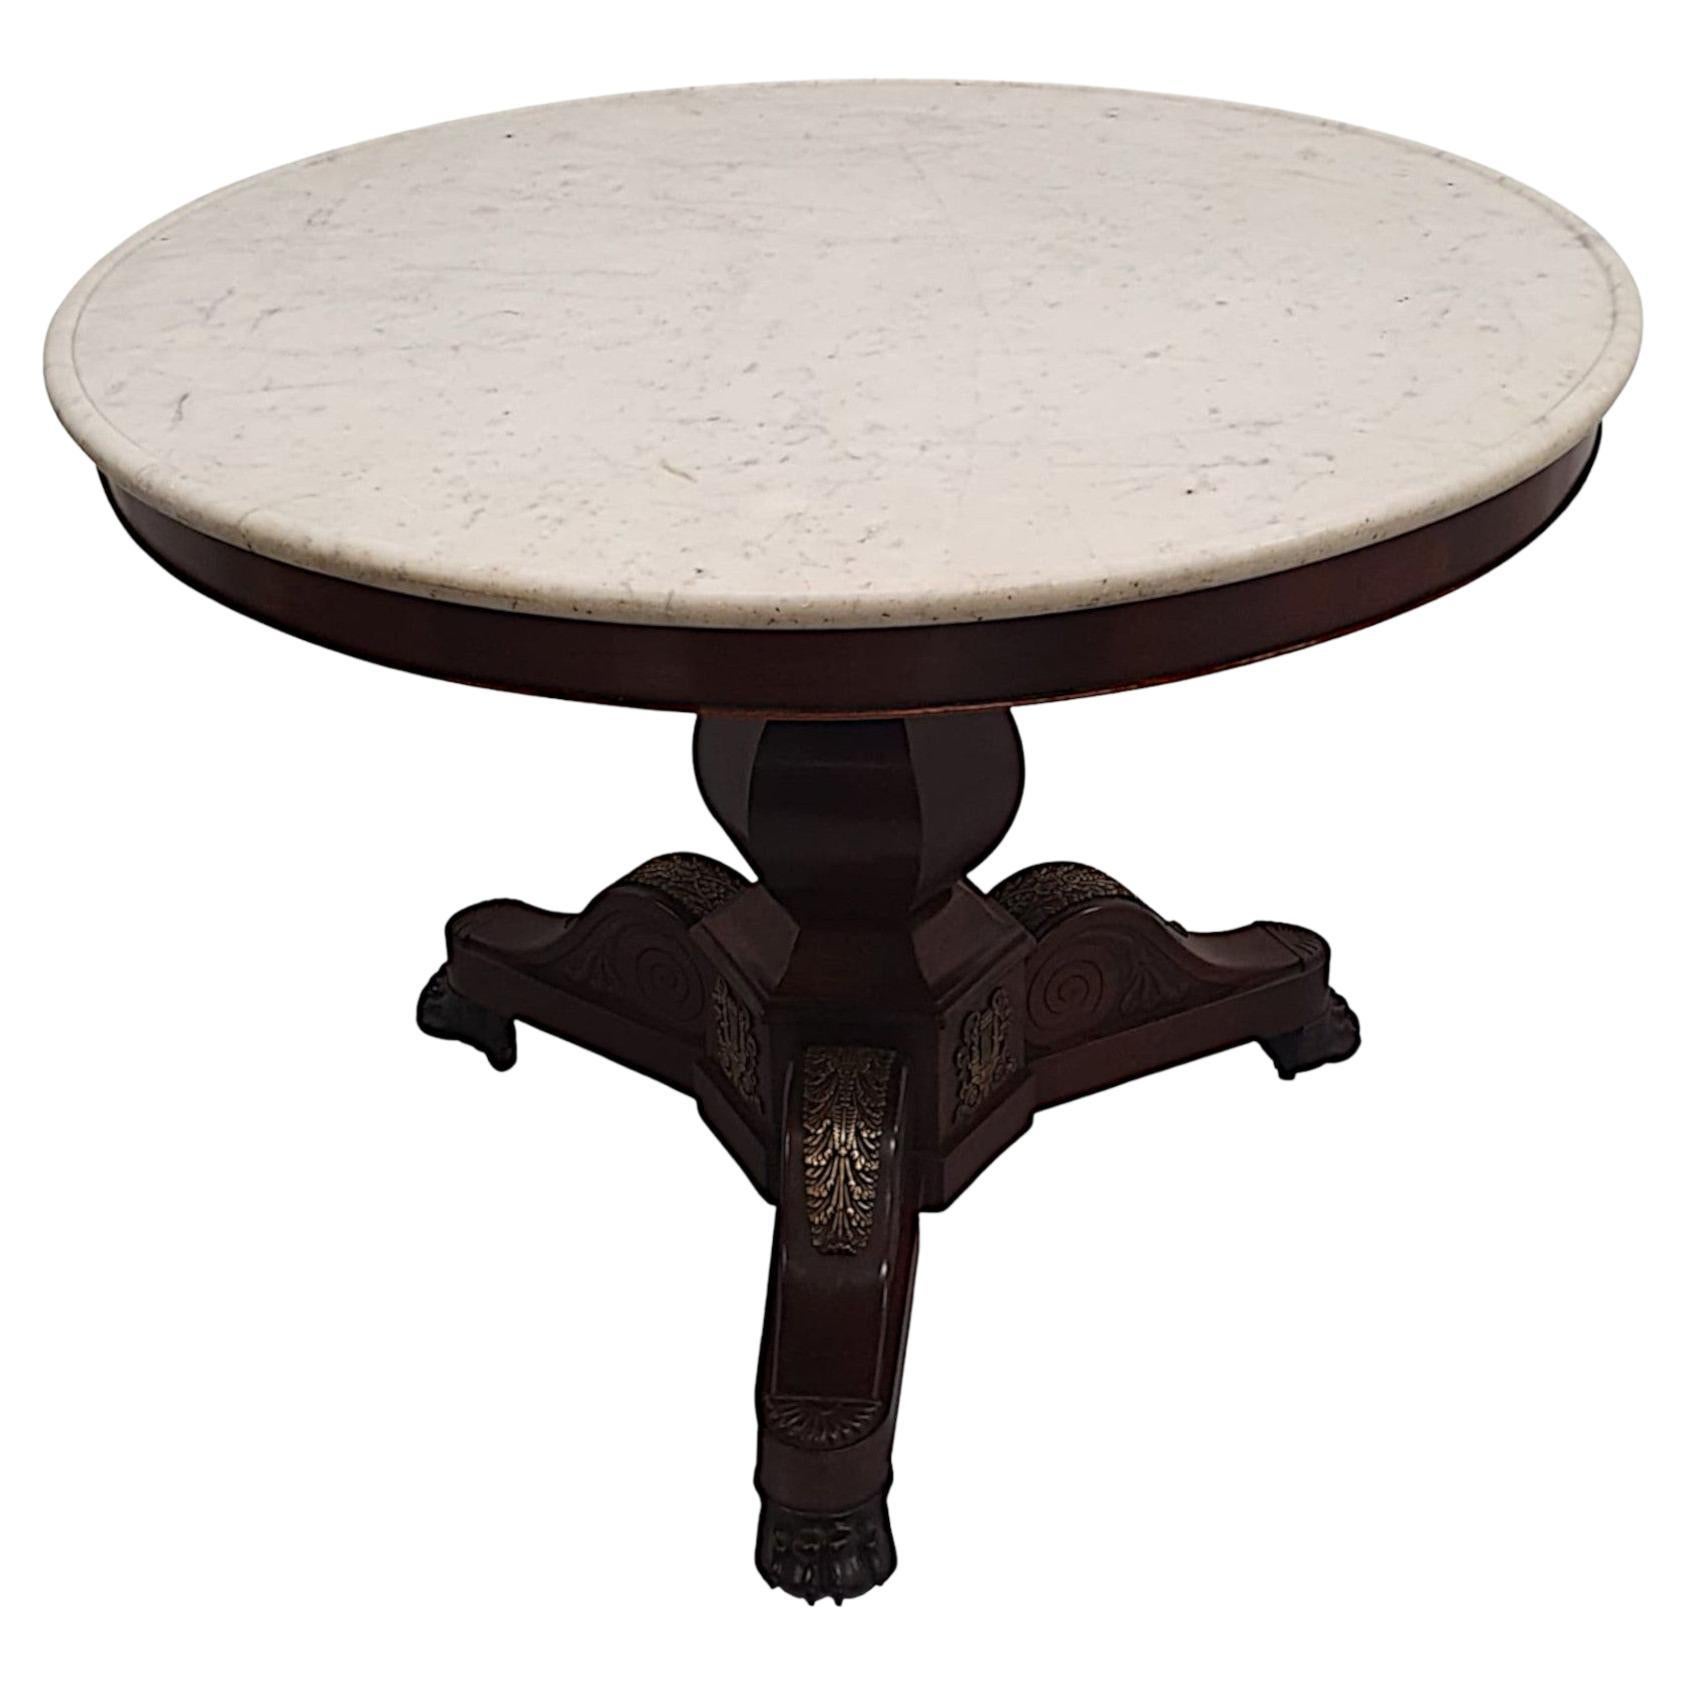  A Very Fine 19th Century White Marble Top Centre Table